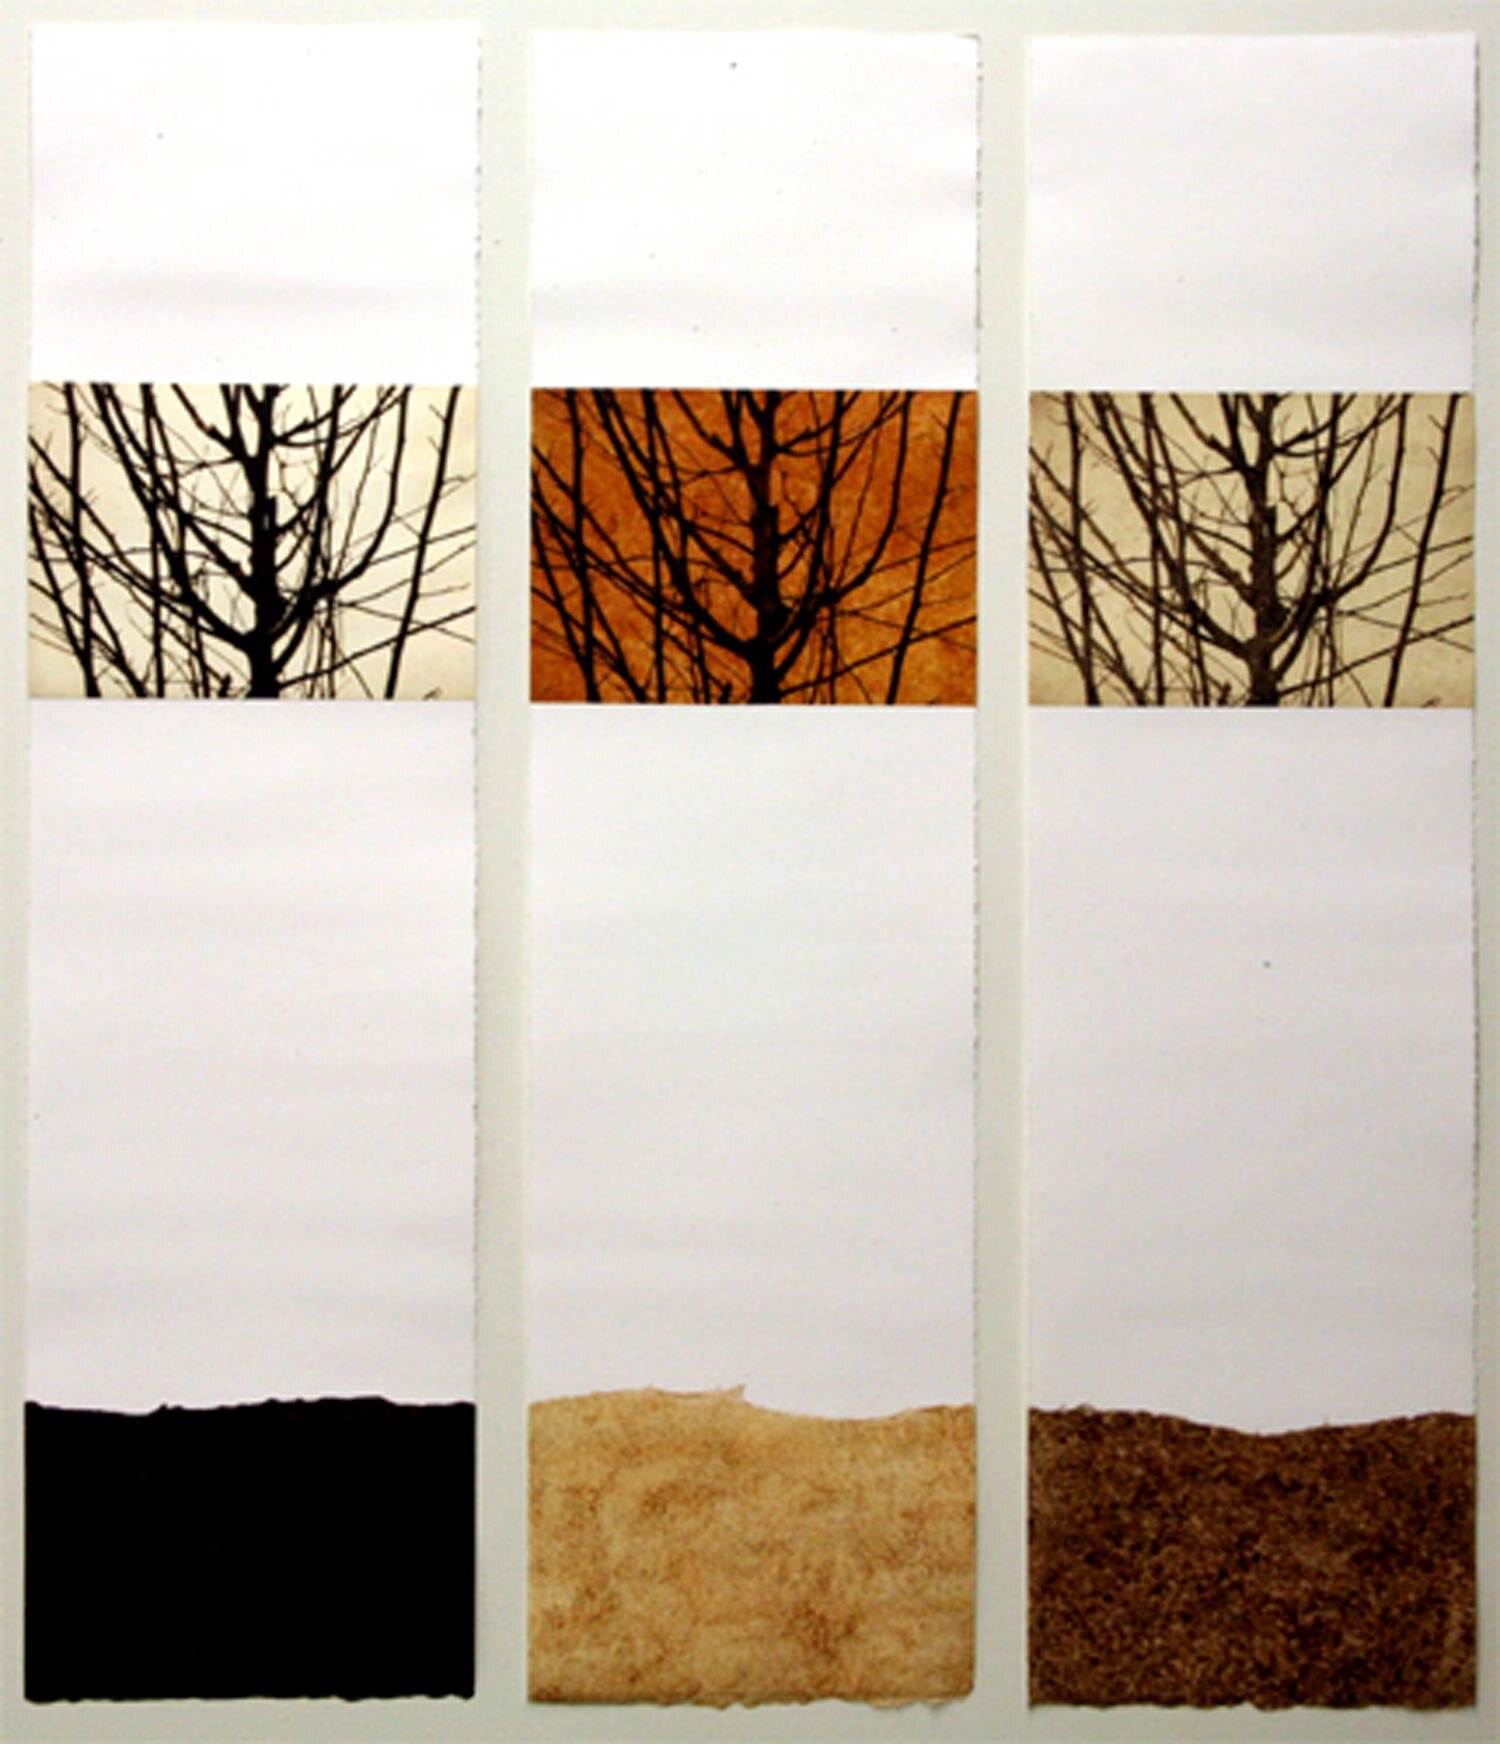 Shades of Autumn (triptych)